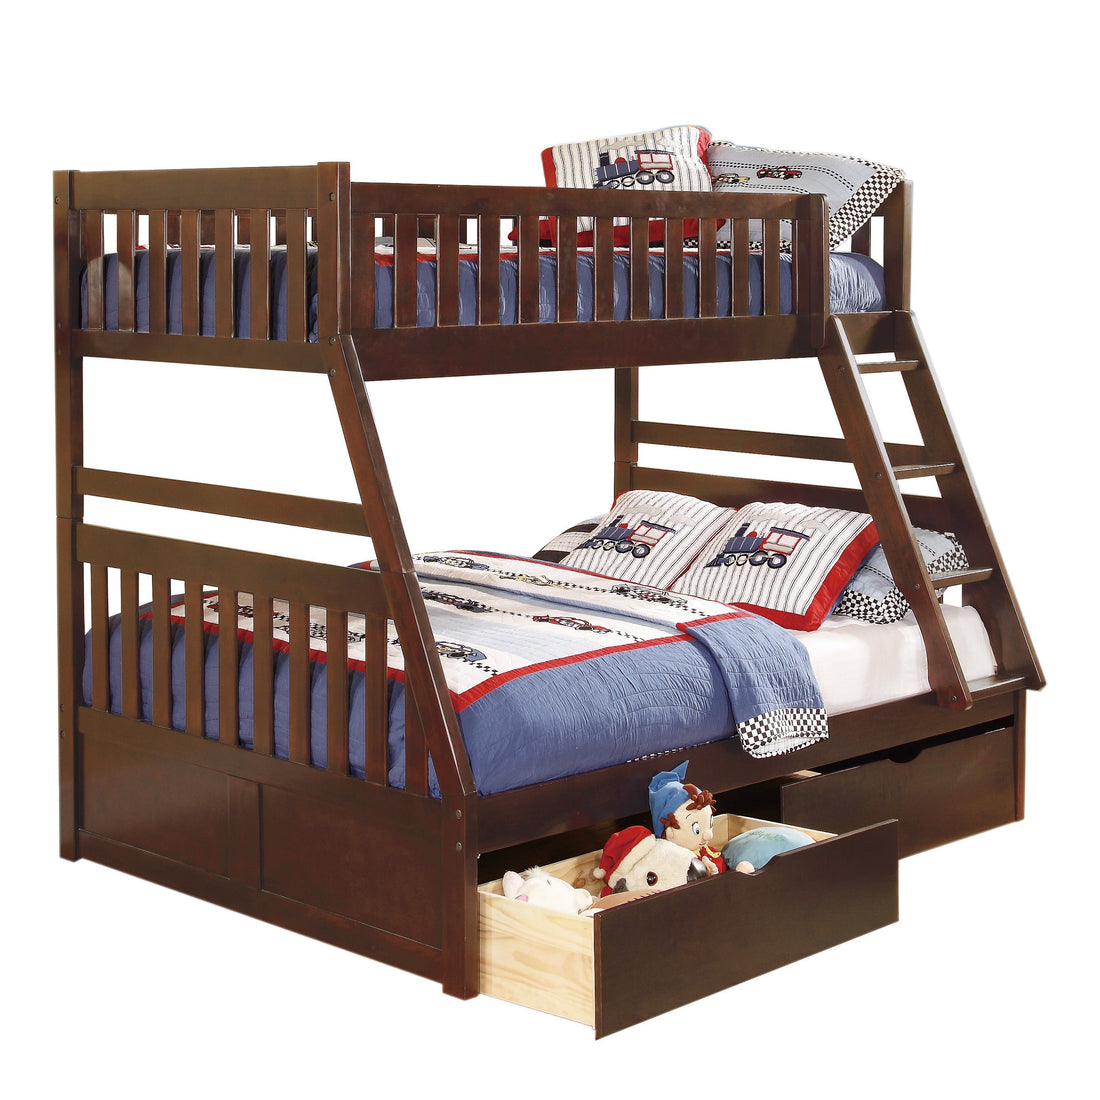 Rowe Dark Cherry Twin/Full Bunk Bed with Storage Boxes - SET | B2013TFDC-1 | B2013TFDC-2 | B2013TFDC-SL | B2013DC-T - Bien Home Furniture &amp; Electronics